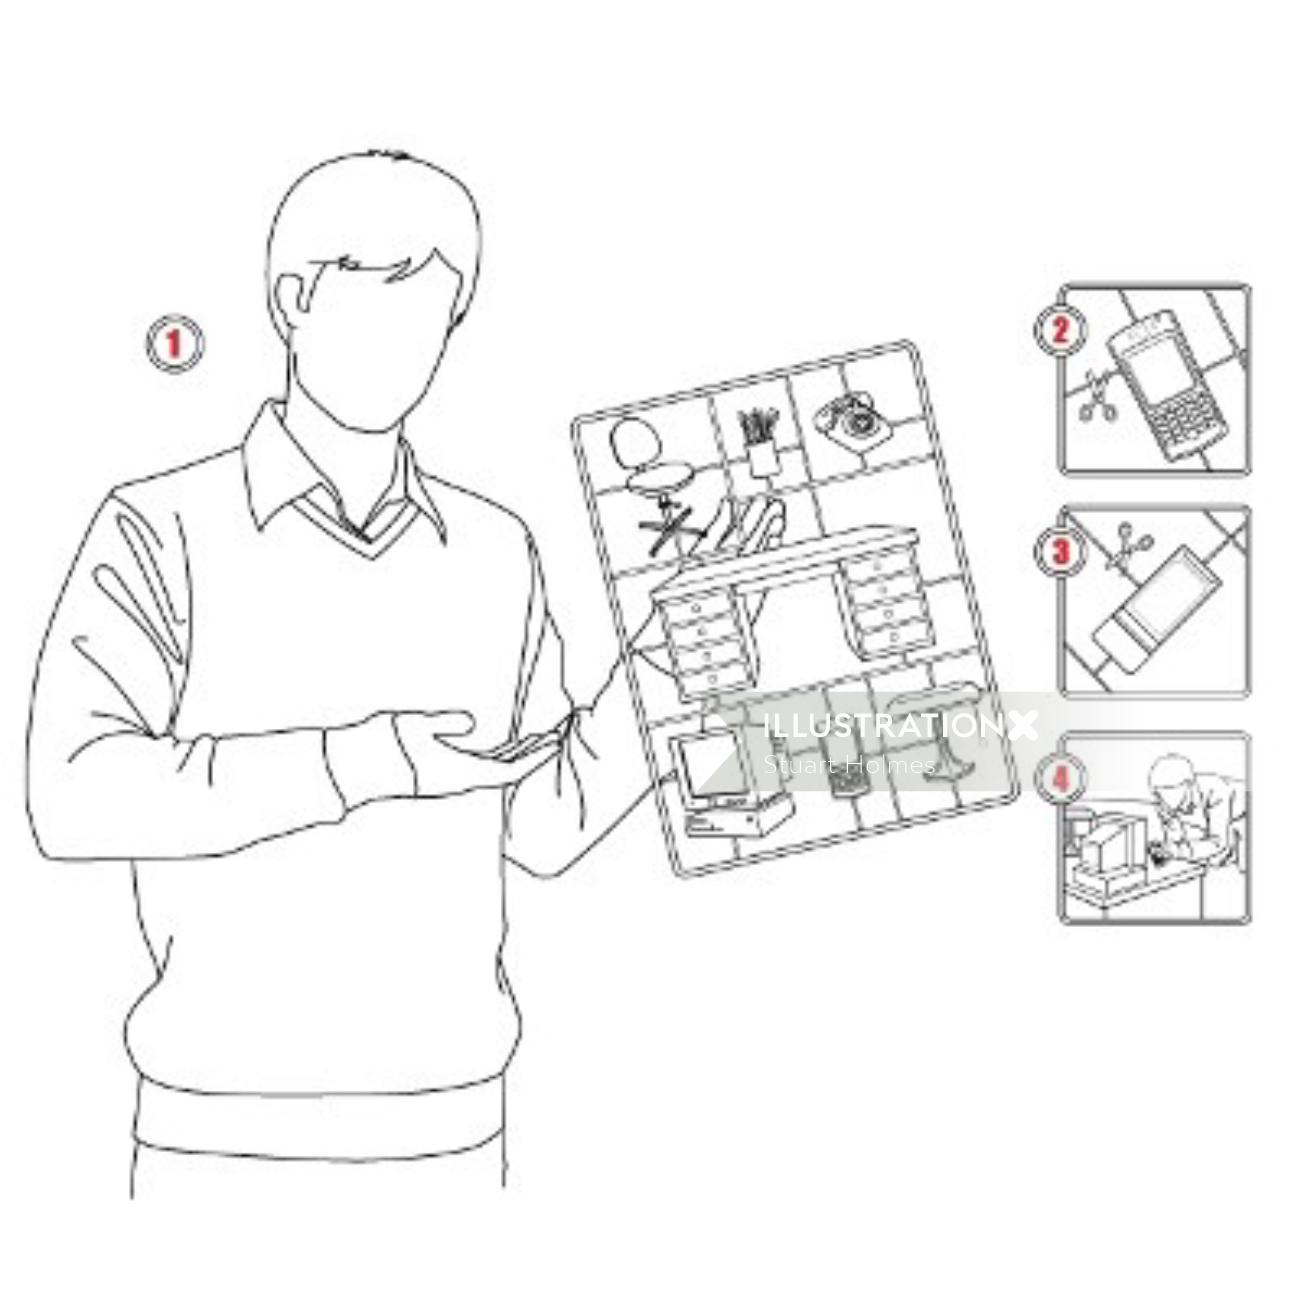 Key line art drawing of a man with a chart in his hand